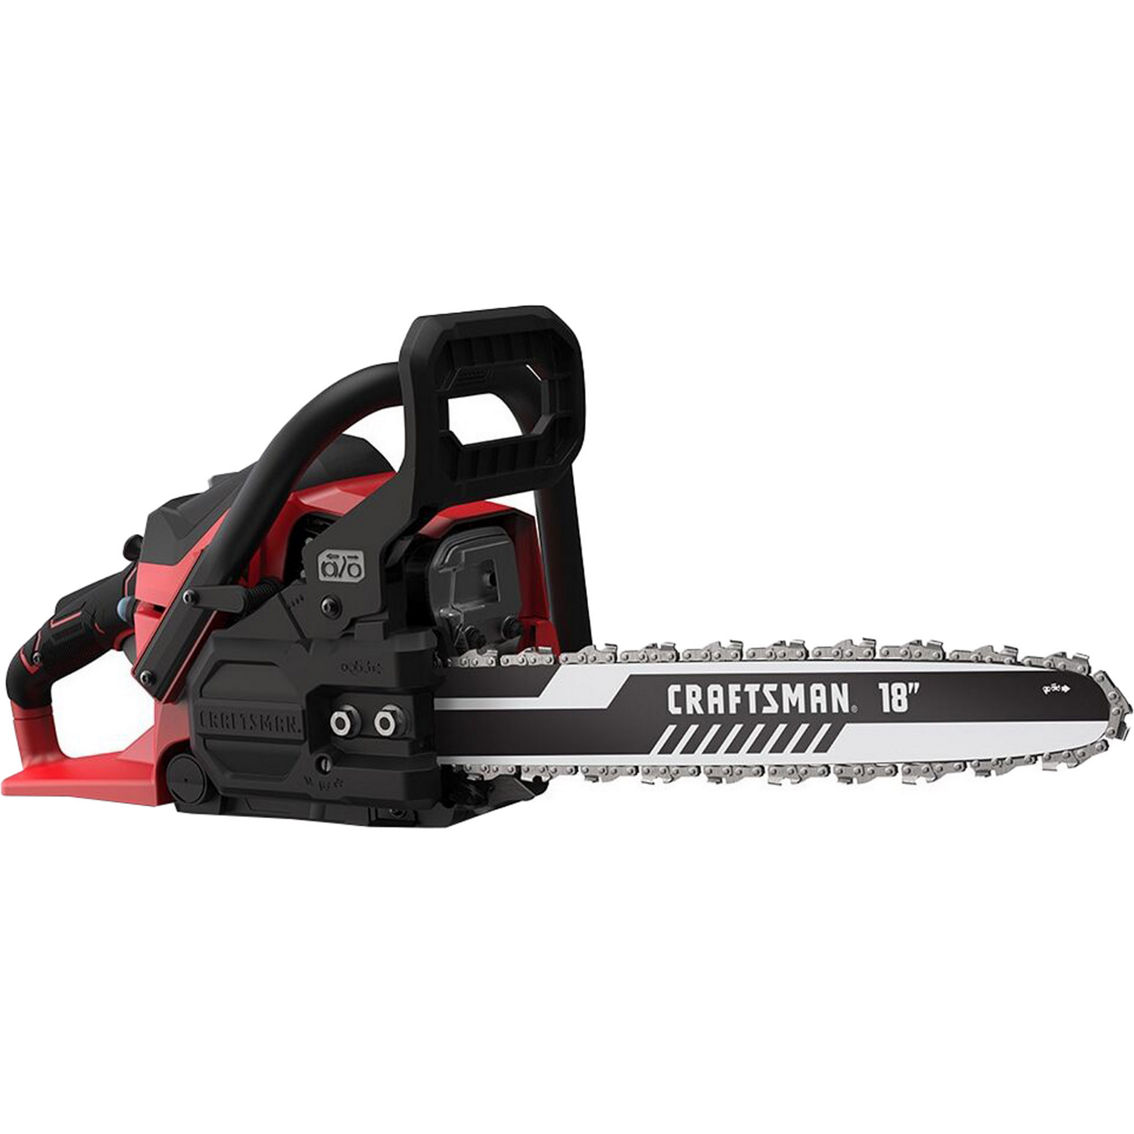 Craftsman 20-in. 46cc 2 Cycle Gas Chainsaw - Image 3 of 6